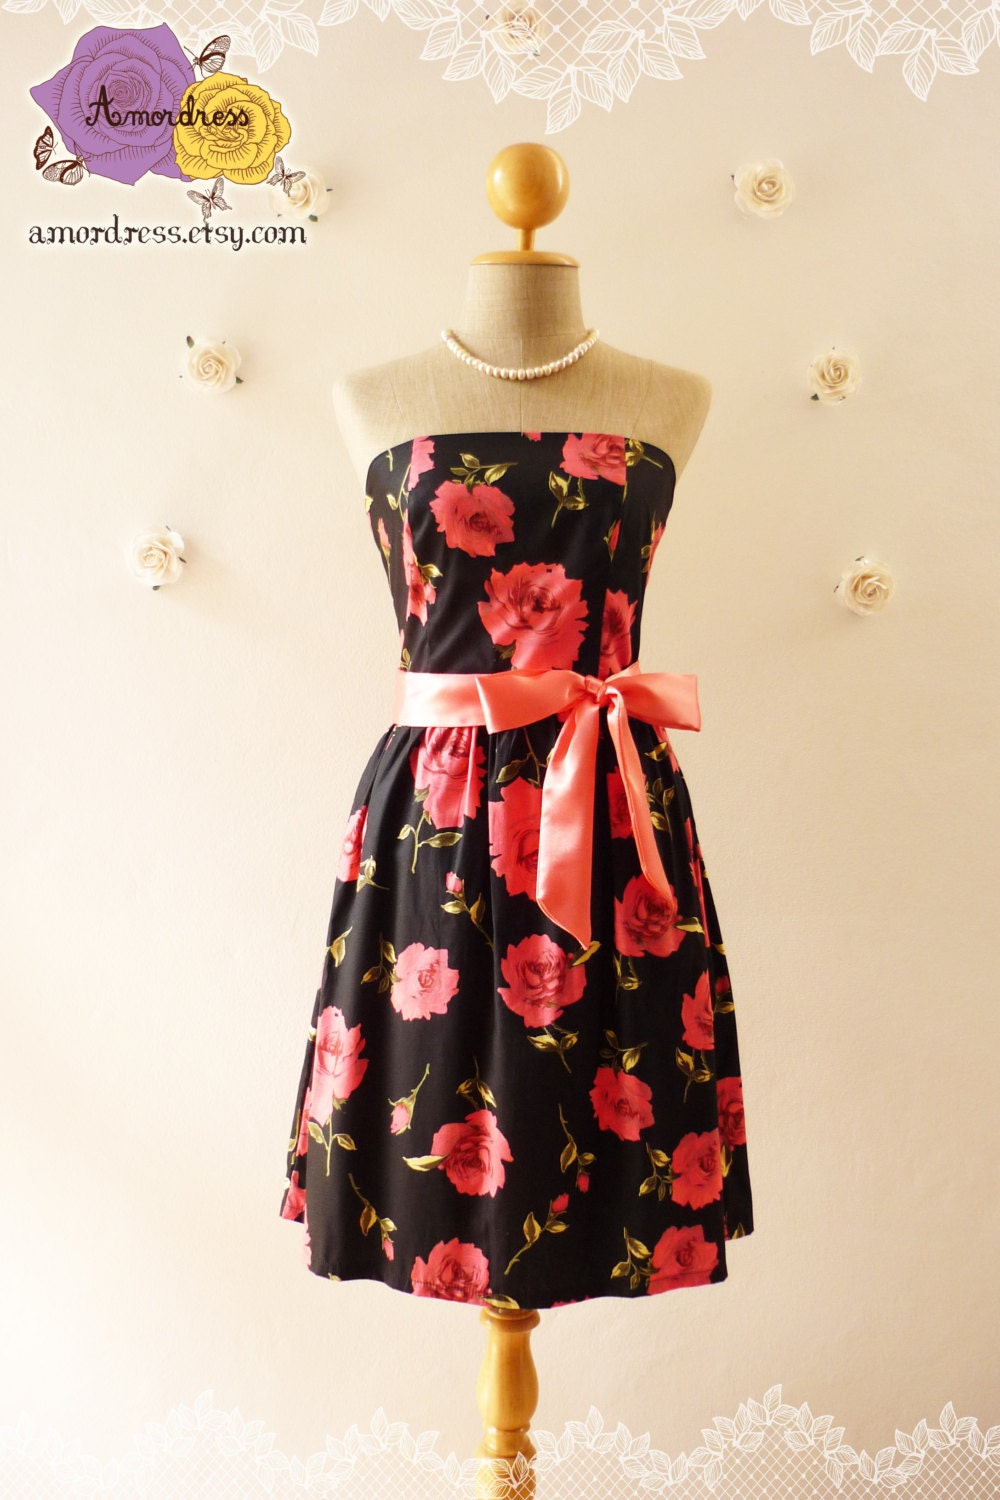 Floral Party Dress.. Black with Pink Rose Gorgeous by Amordress